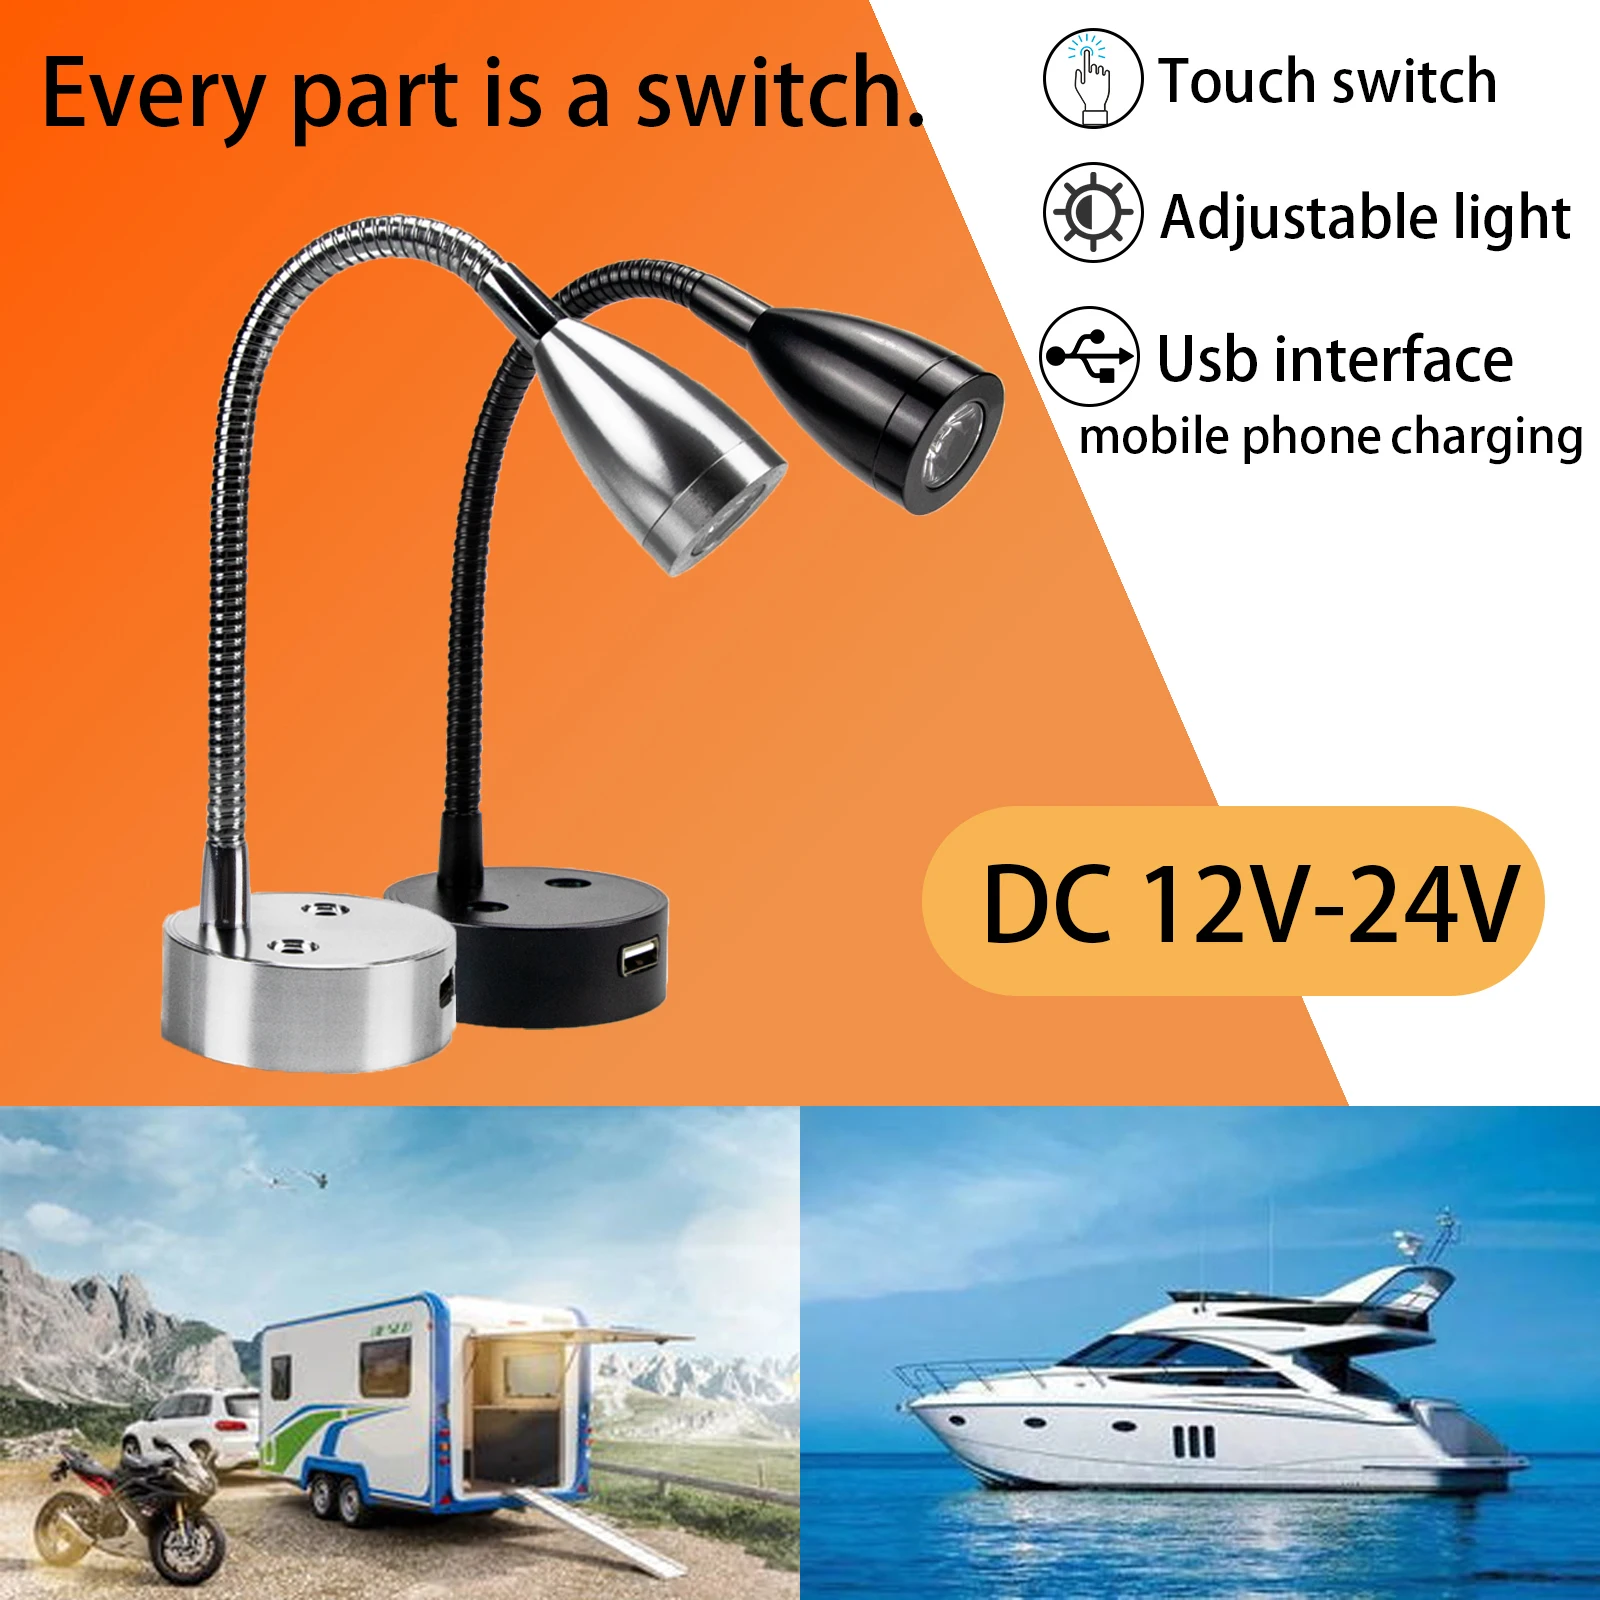 

DC12V 24V RV Boat LED Reading Light Dimmable Flexible Gooseneck Wall Lamp for Truck Motorhome Yachts Cabin with USB Charger Port